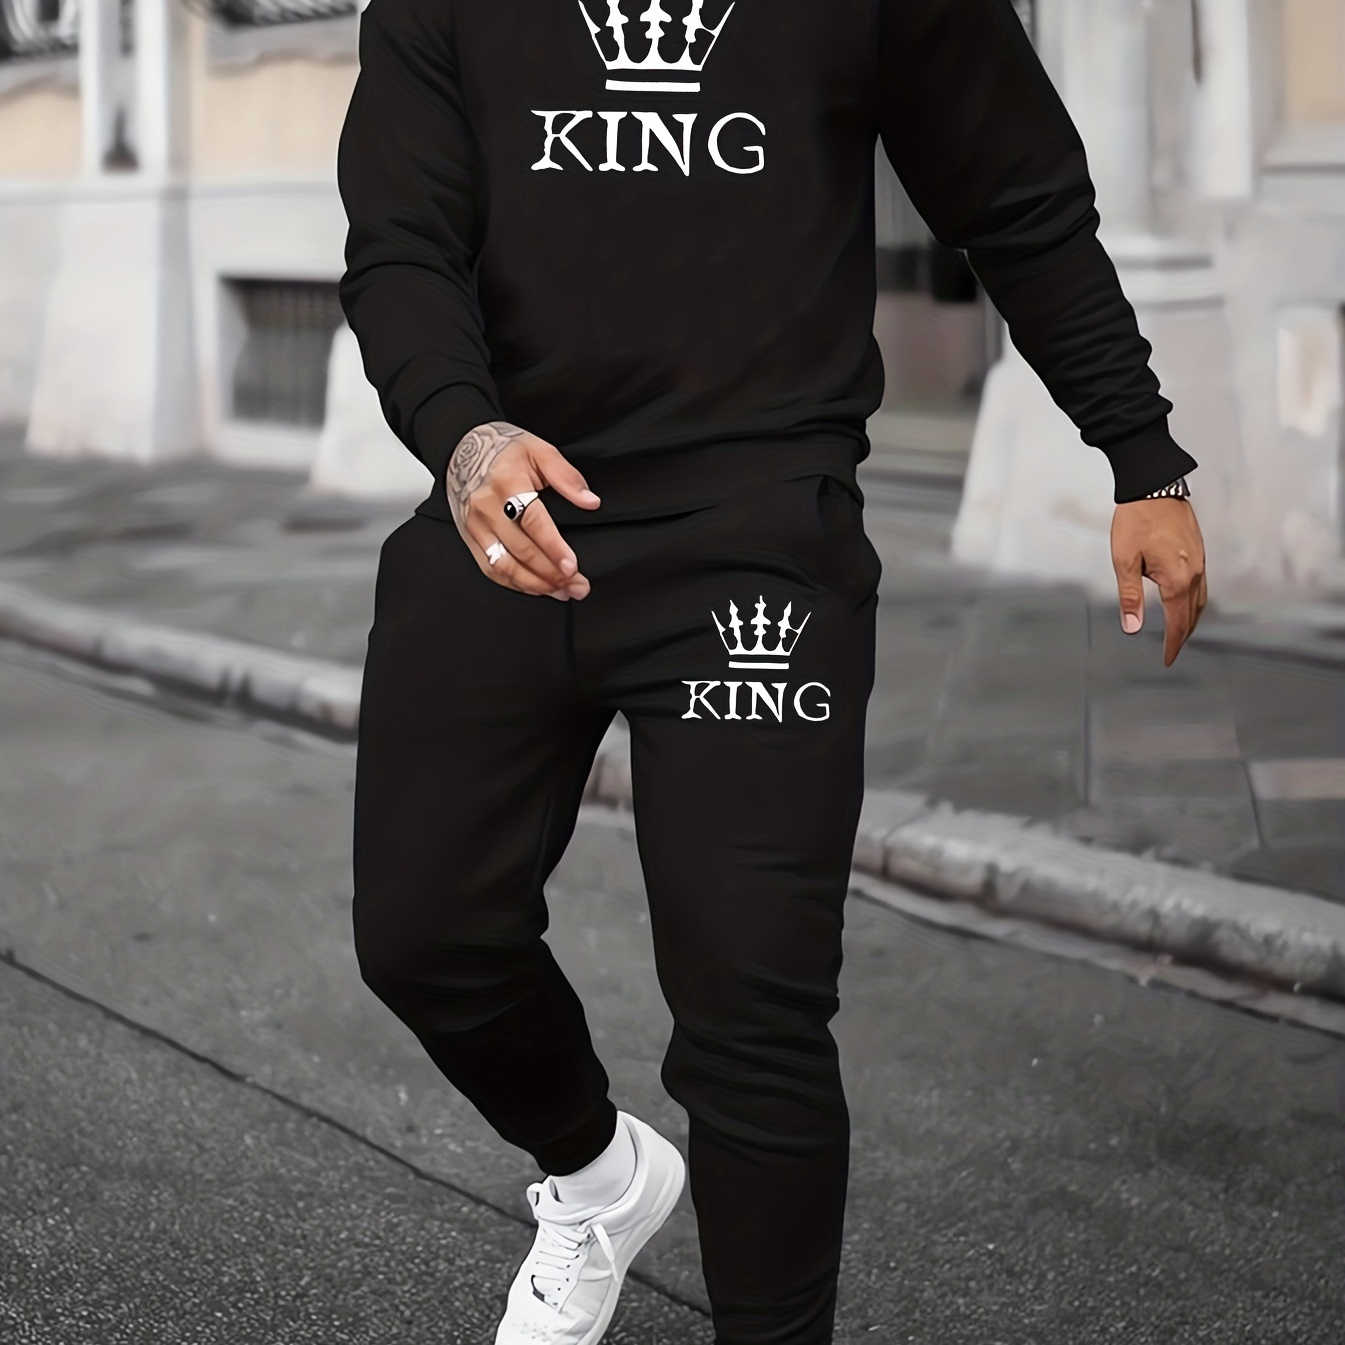 

King Print, Men's 2pcs Outfits, Casual Crew Neck Long Sleeve Pullover Sweatshirt And Drawstring Sweatpants Joggers Set For Spring Fall, Men's Clothing